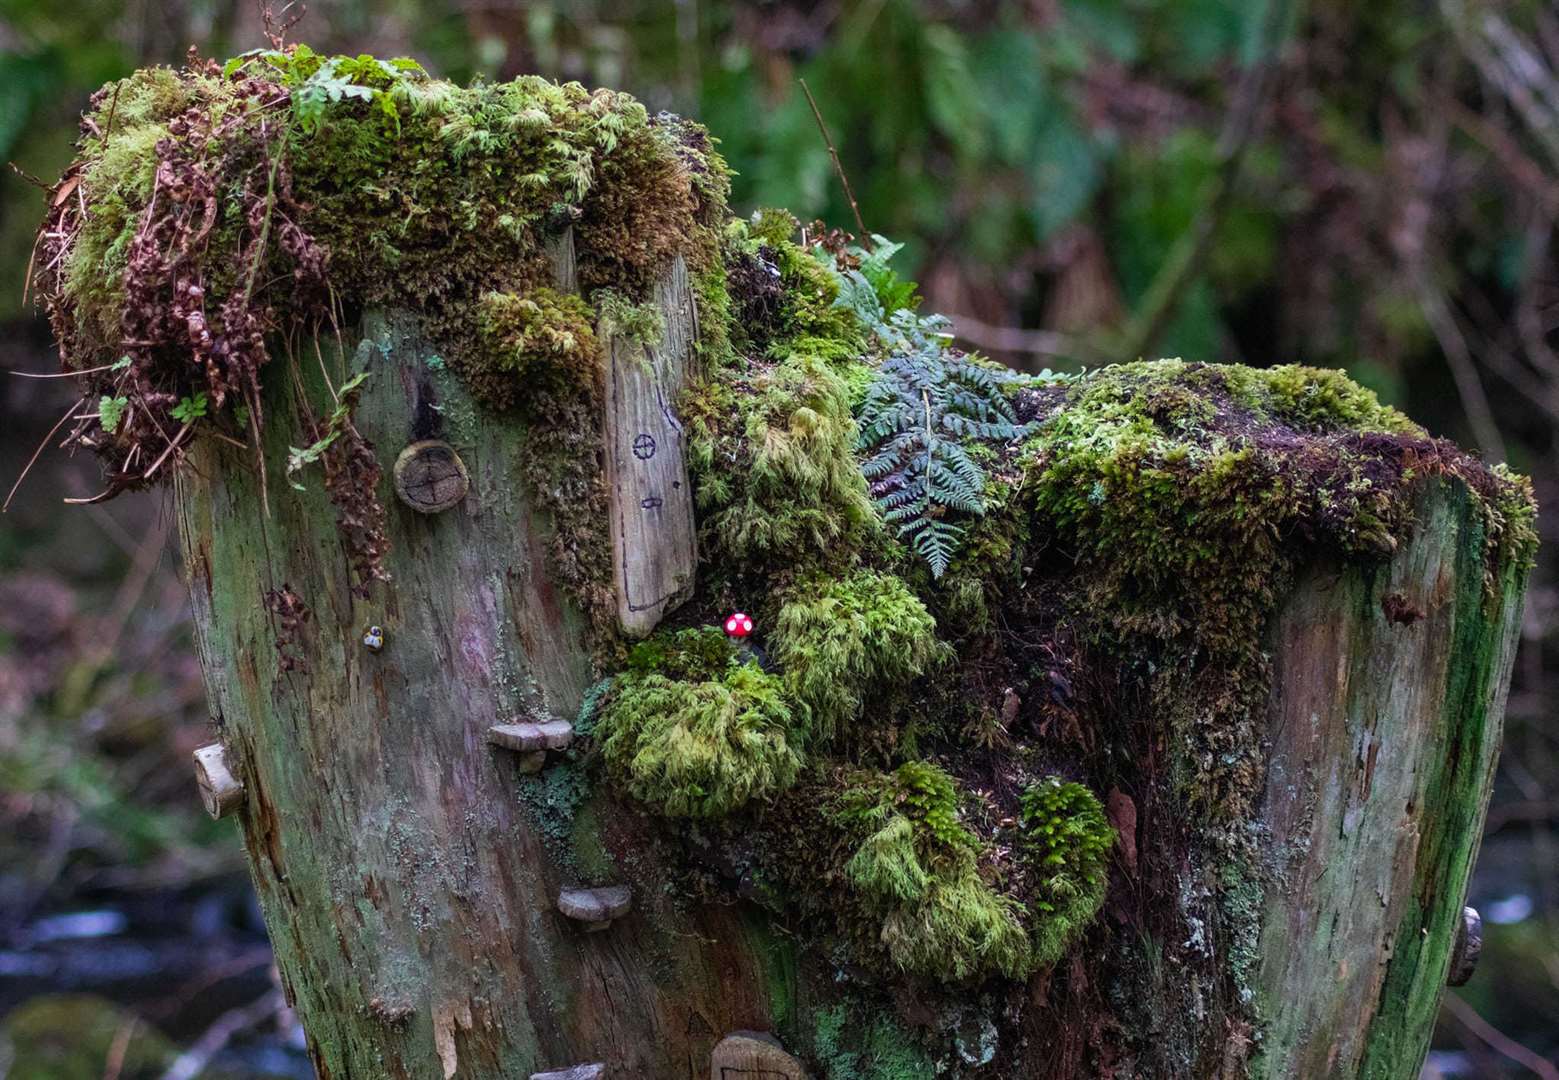 A close look at a fairy house for photography by Ruthie Nicholls.